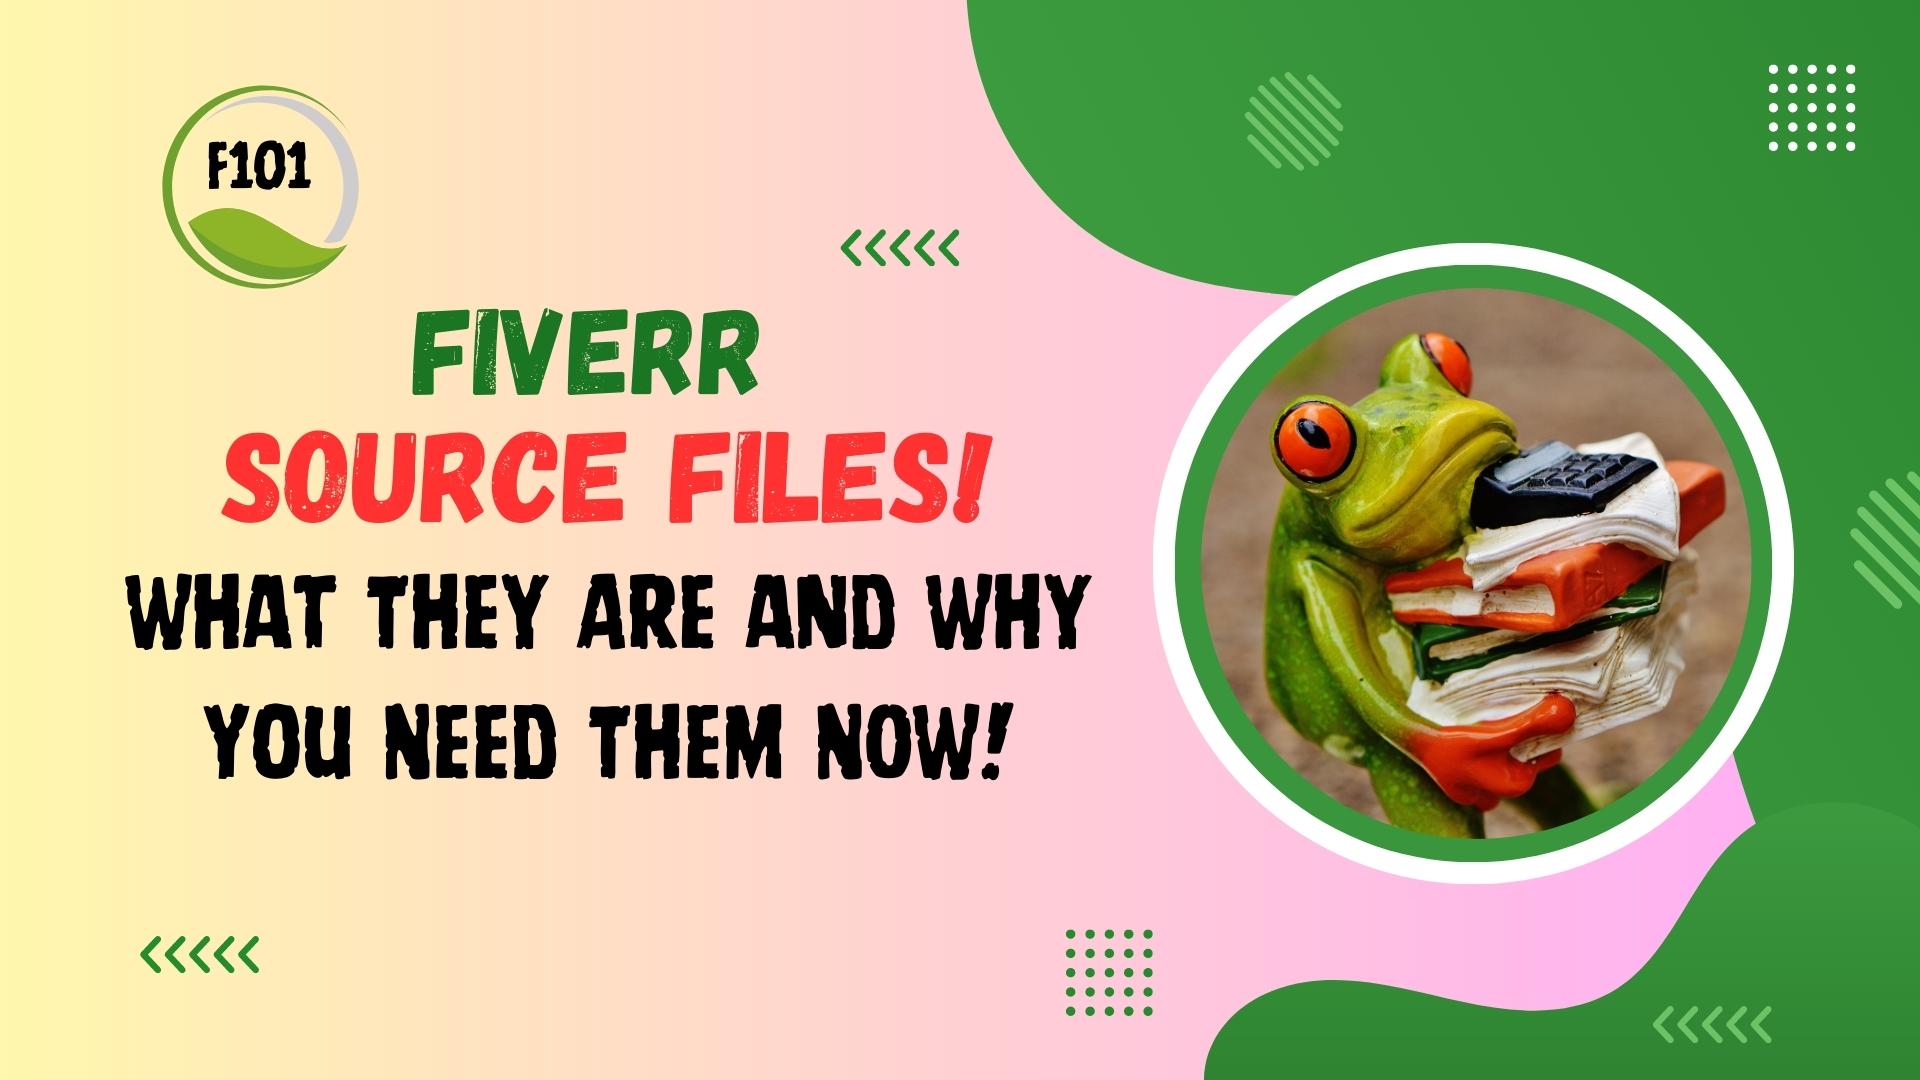 Fiverr Source Files Demystified: What They Are and Why You Need Them NOW